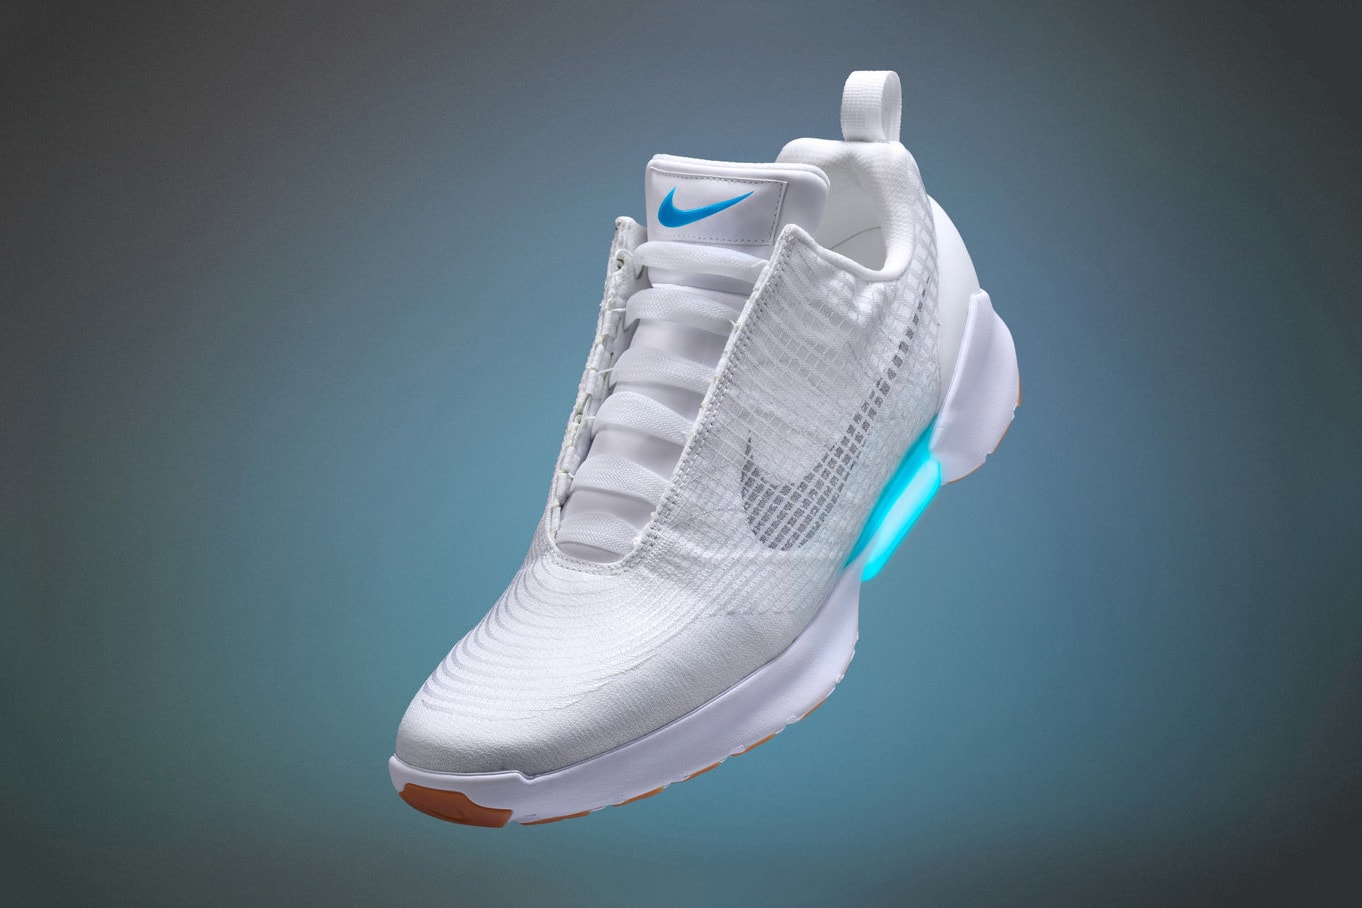 Nike Basketball Auto-Lacing HyperAdapts Coming 2019 court silhouette mark parker 